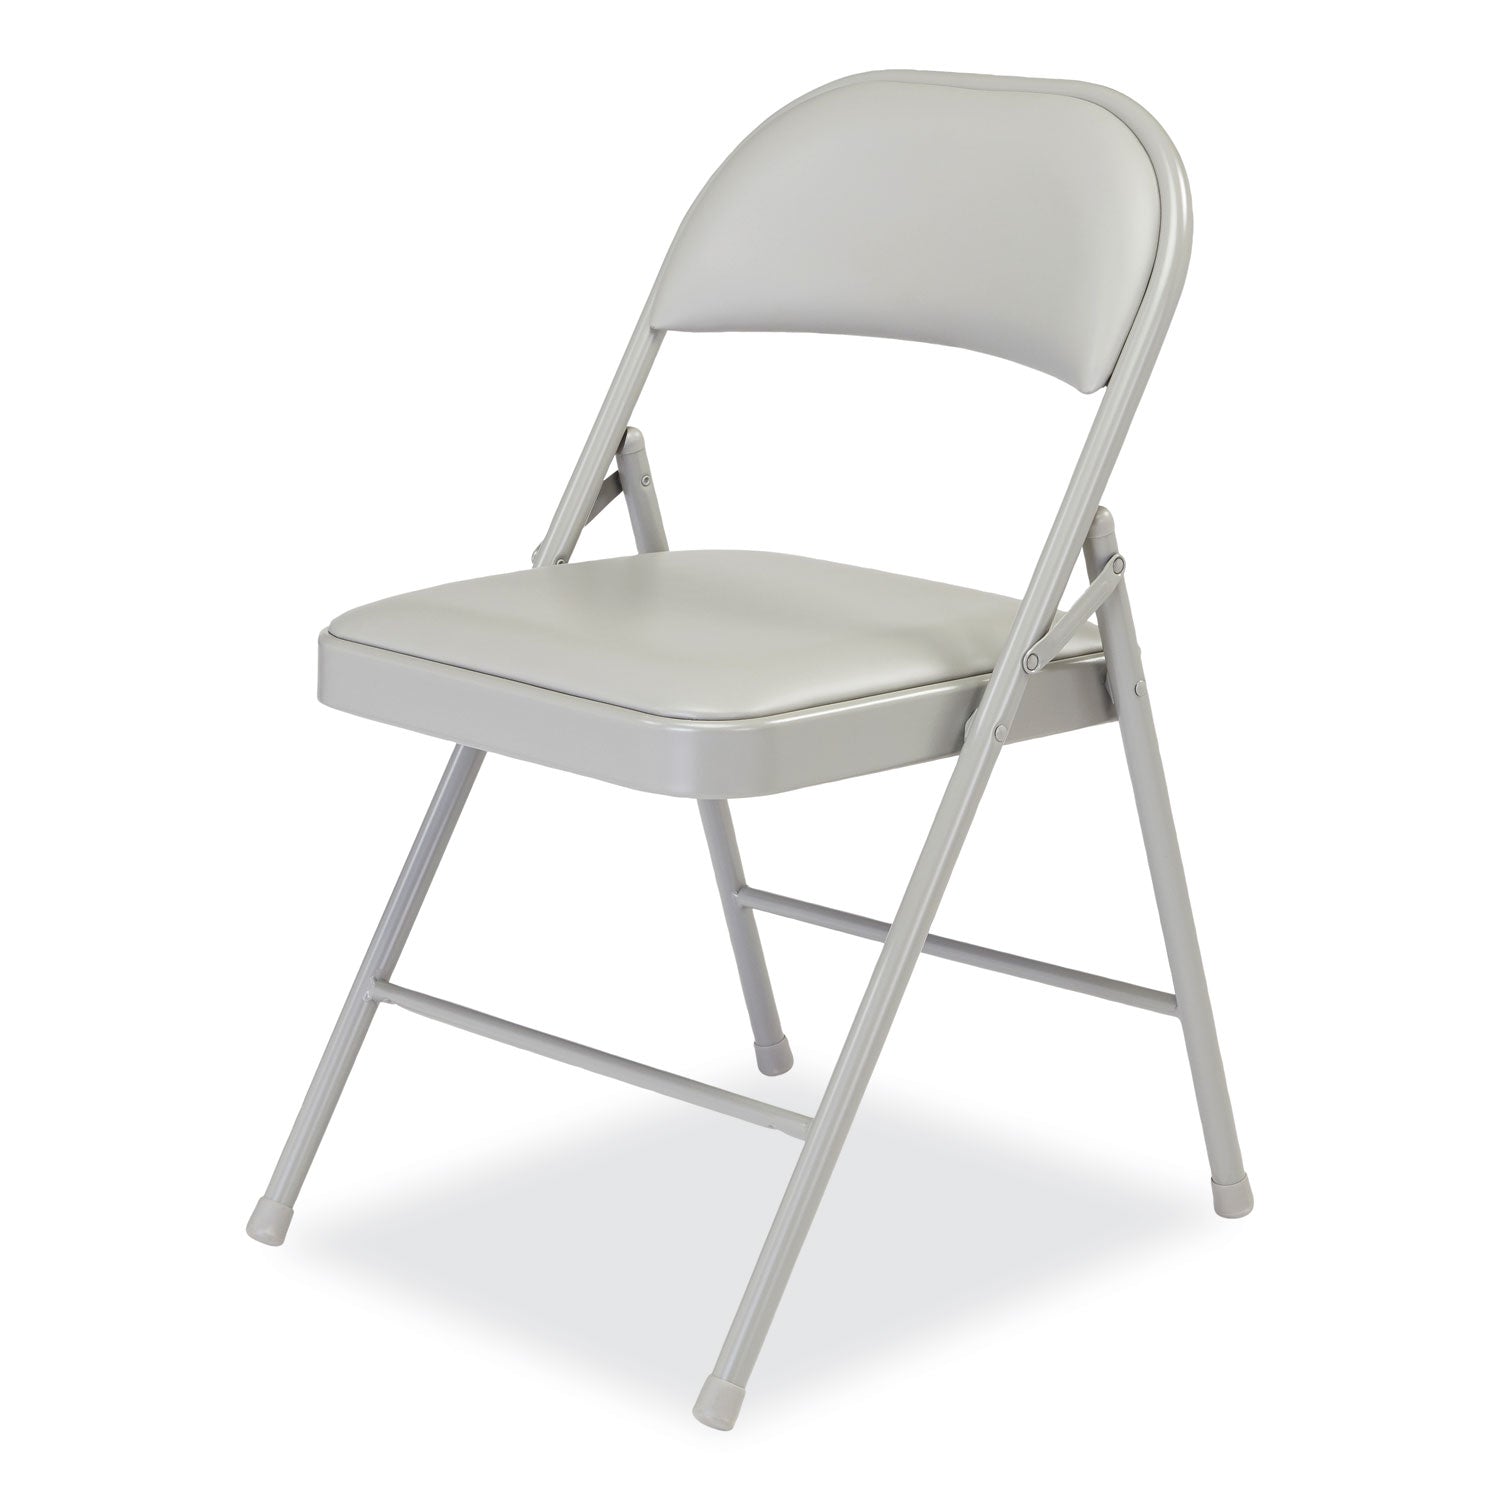 950-series-vinyl-padded-steel-folding-chair-supports-up-to-250-lb-1775-seat-height-gray-4-carton-ships-in-1-3-bus-days_nps952 - 3